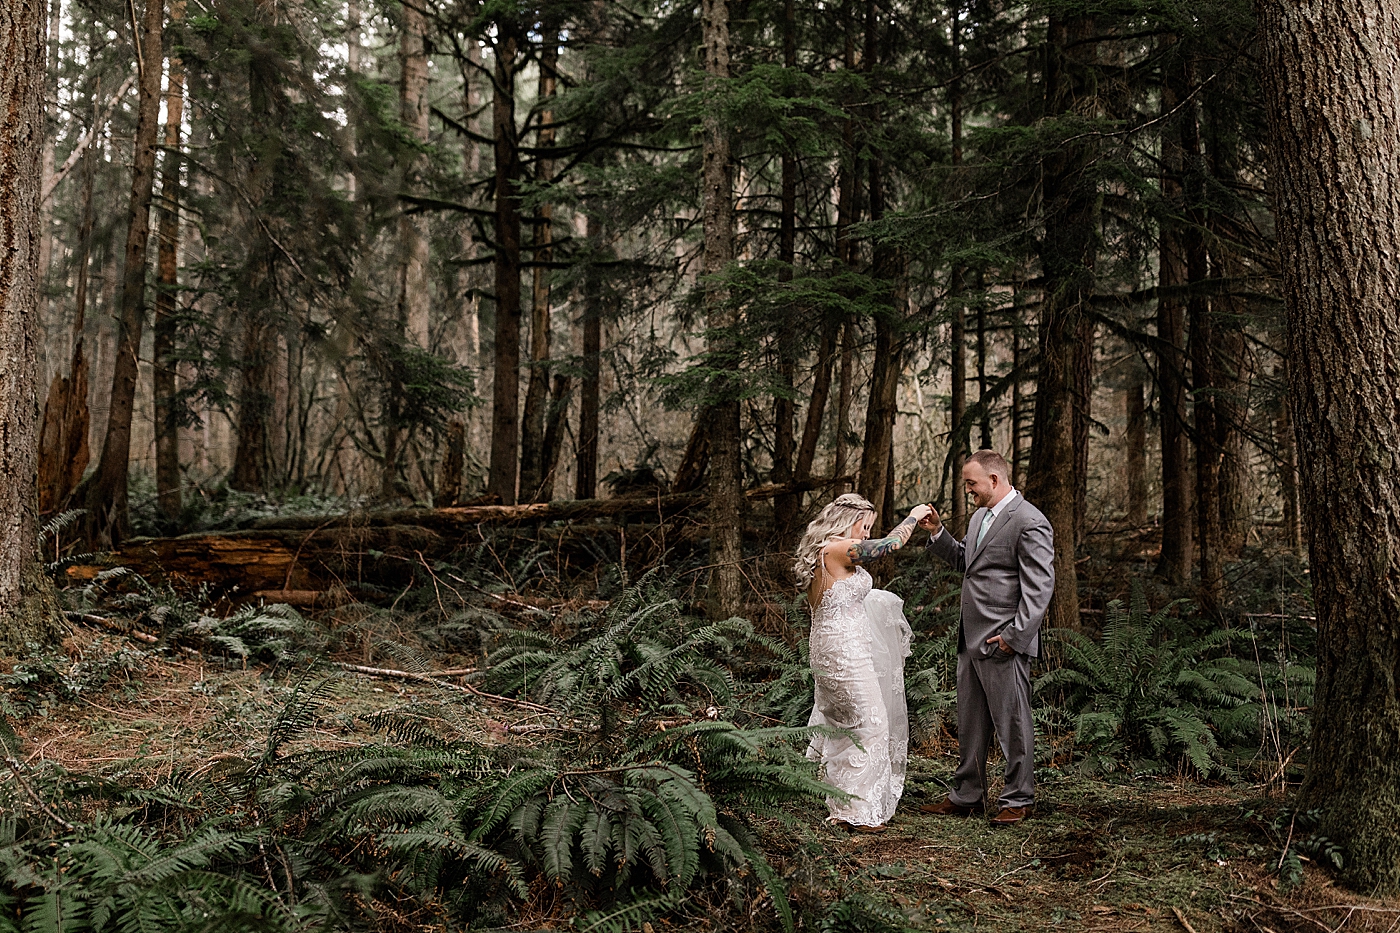 Bride and groom portraits. Photo by Megan Montalvo Photography.